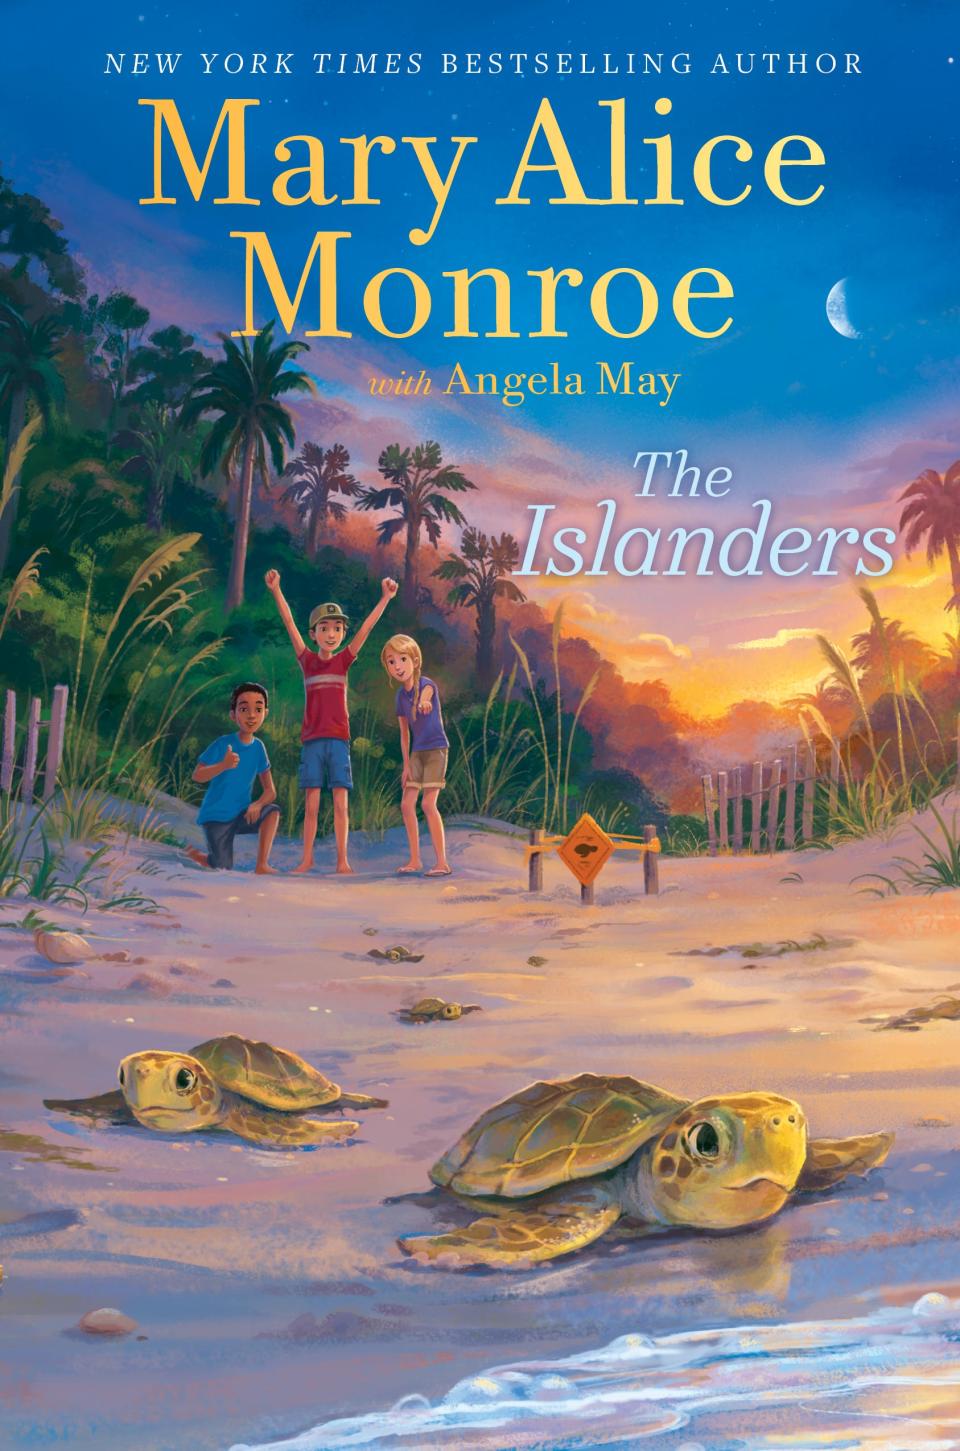 'The Islanders' by Mary Alice Monroe and Angela May